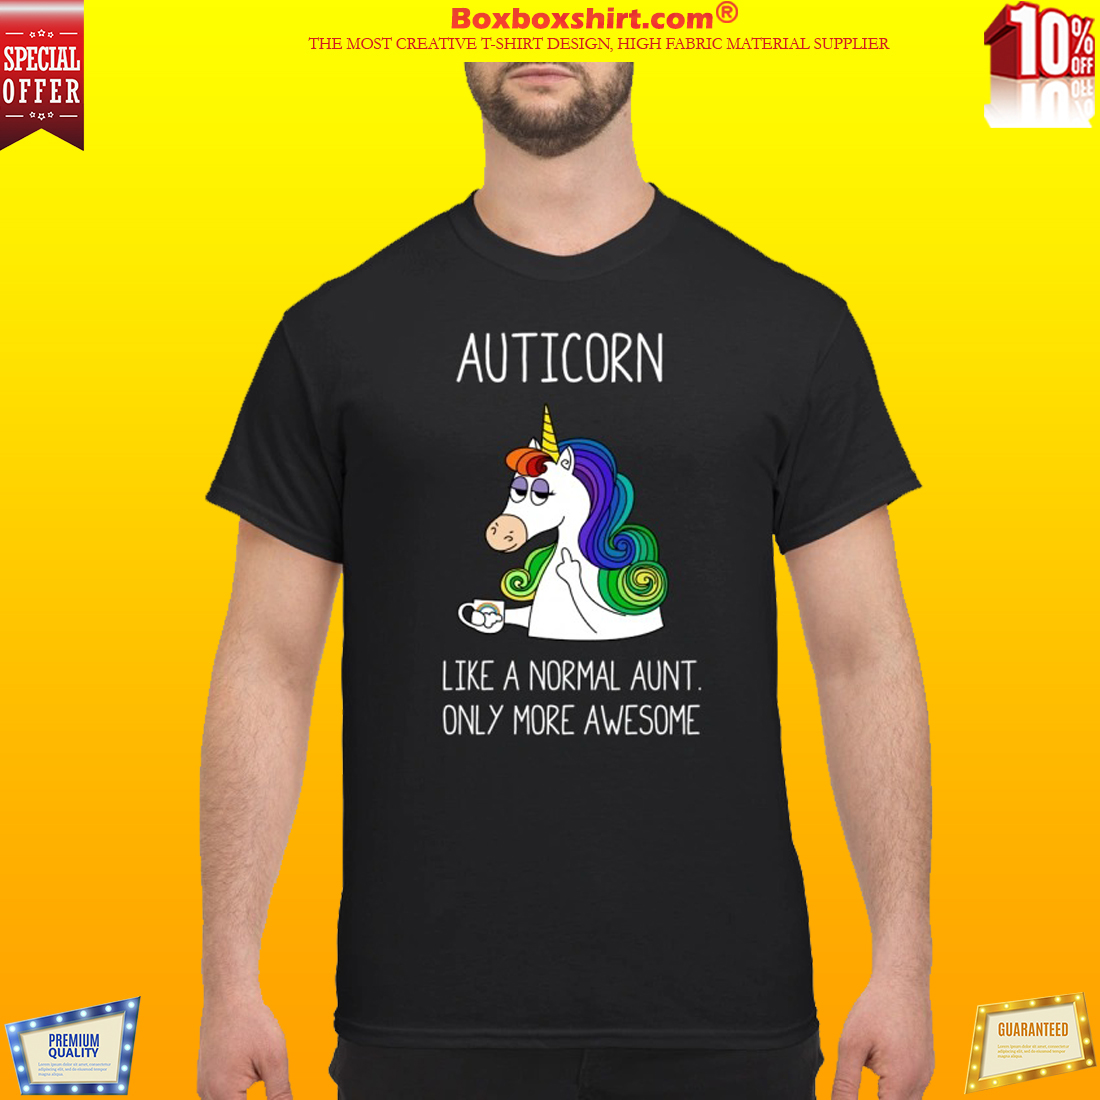 Auticorn like a normal aunt only more awesome classic shirt